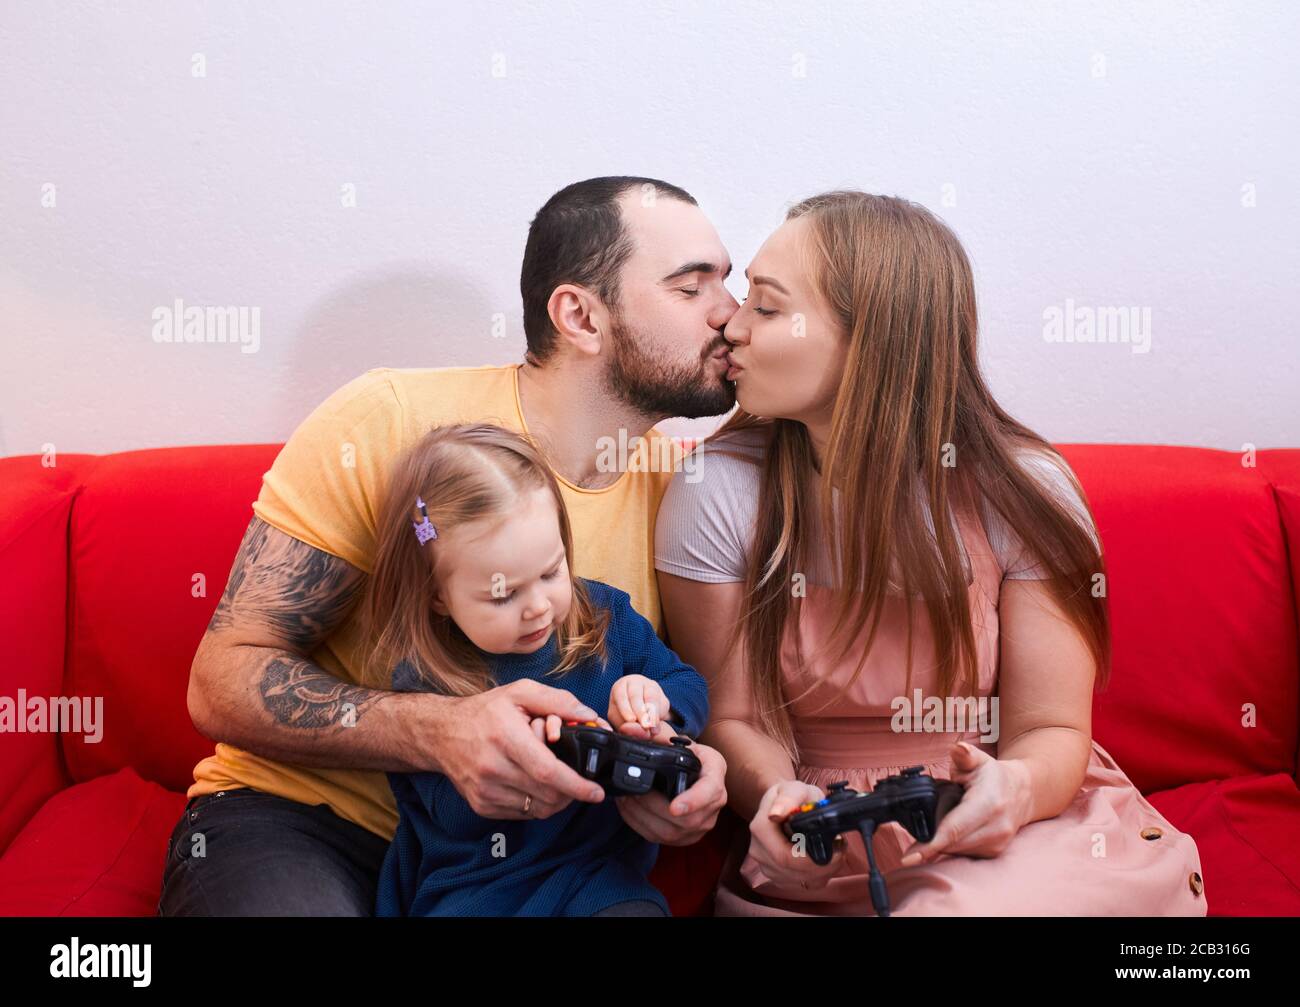 cute relationships playing video games